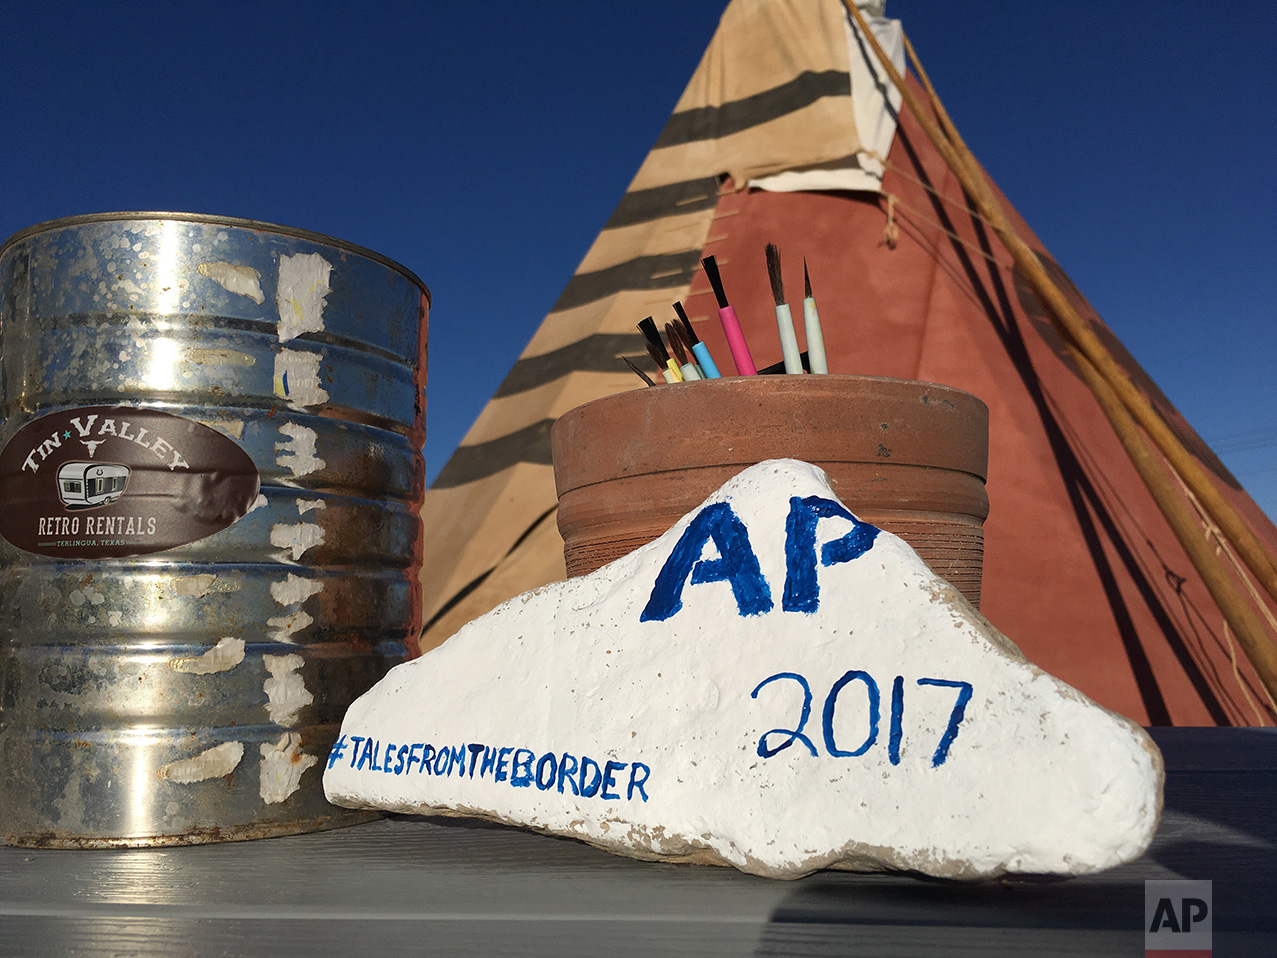  A rock painted by AP journalist Christopher Sherman, at the invitation of Tin Valley Retro Rentals, where overnight guests are encouraged to leave their mark in their desert playground in Terlingua, Texas, near the US-Mexico border, Monday, March 27